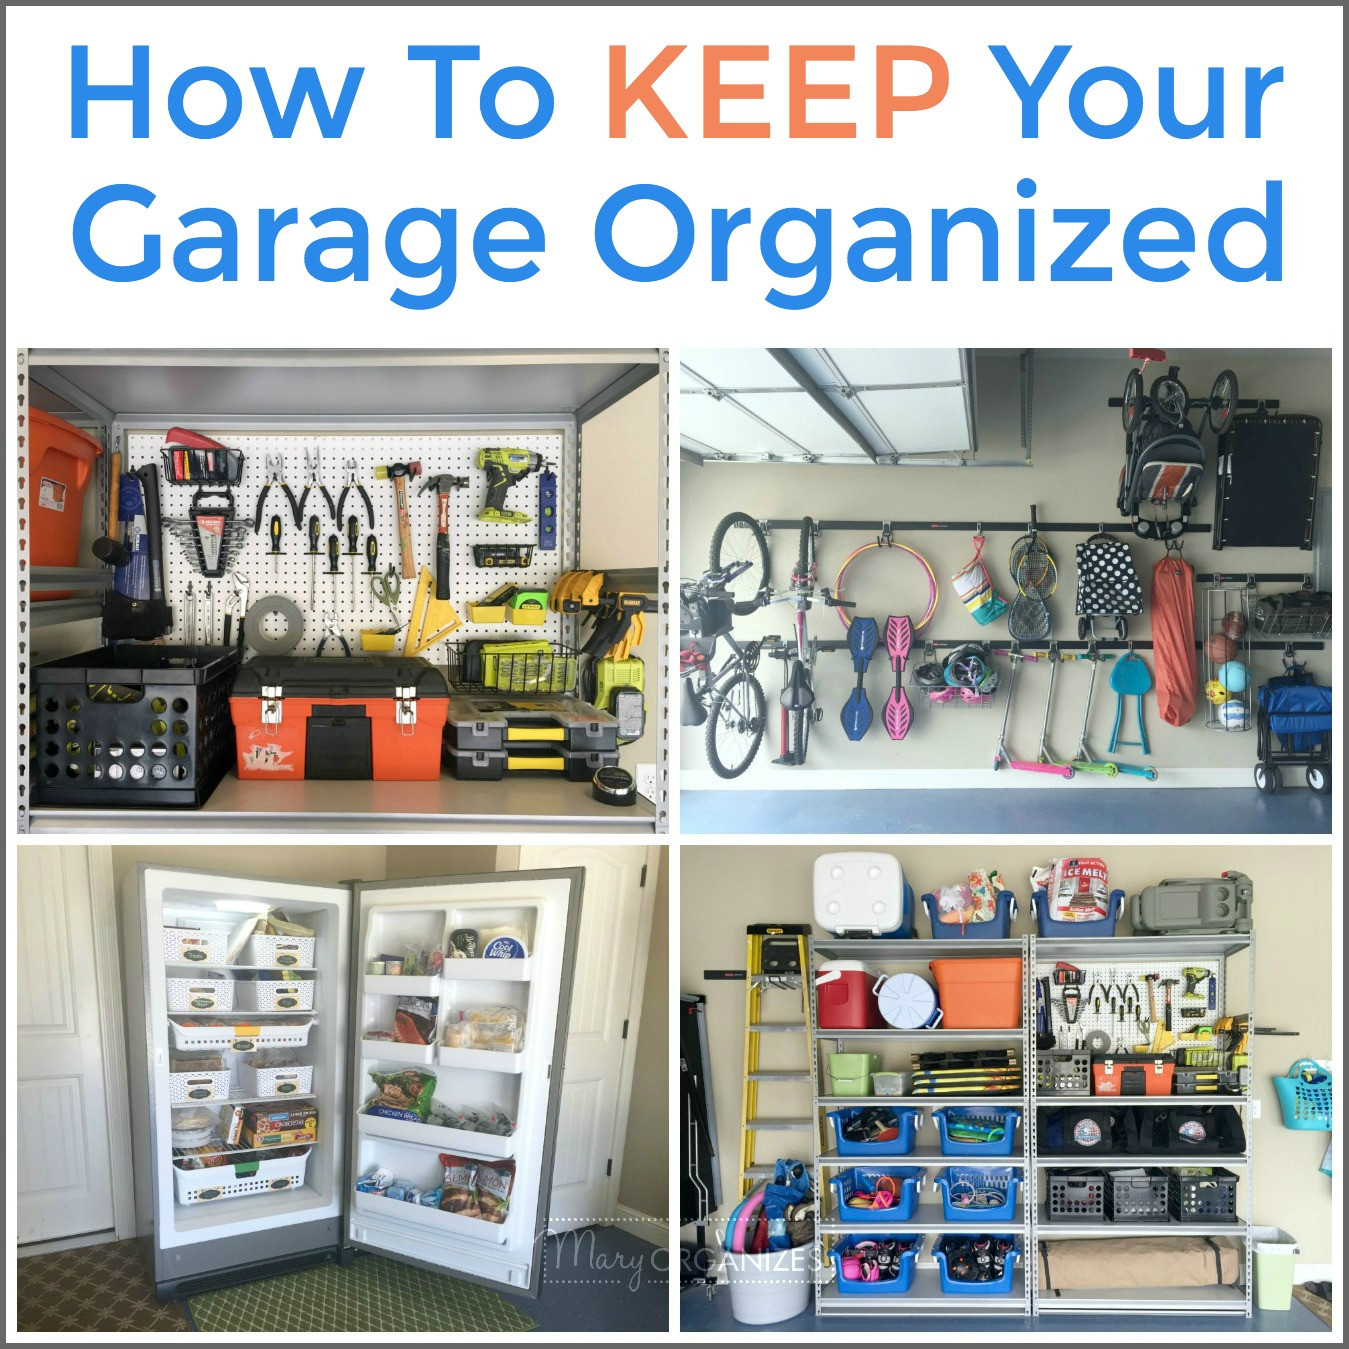 Organize Your Garage
 Organize Your Garage ONE WEEK All About The Garage